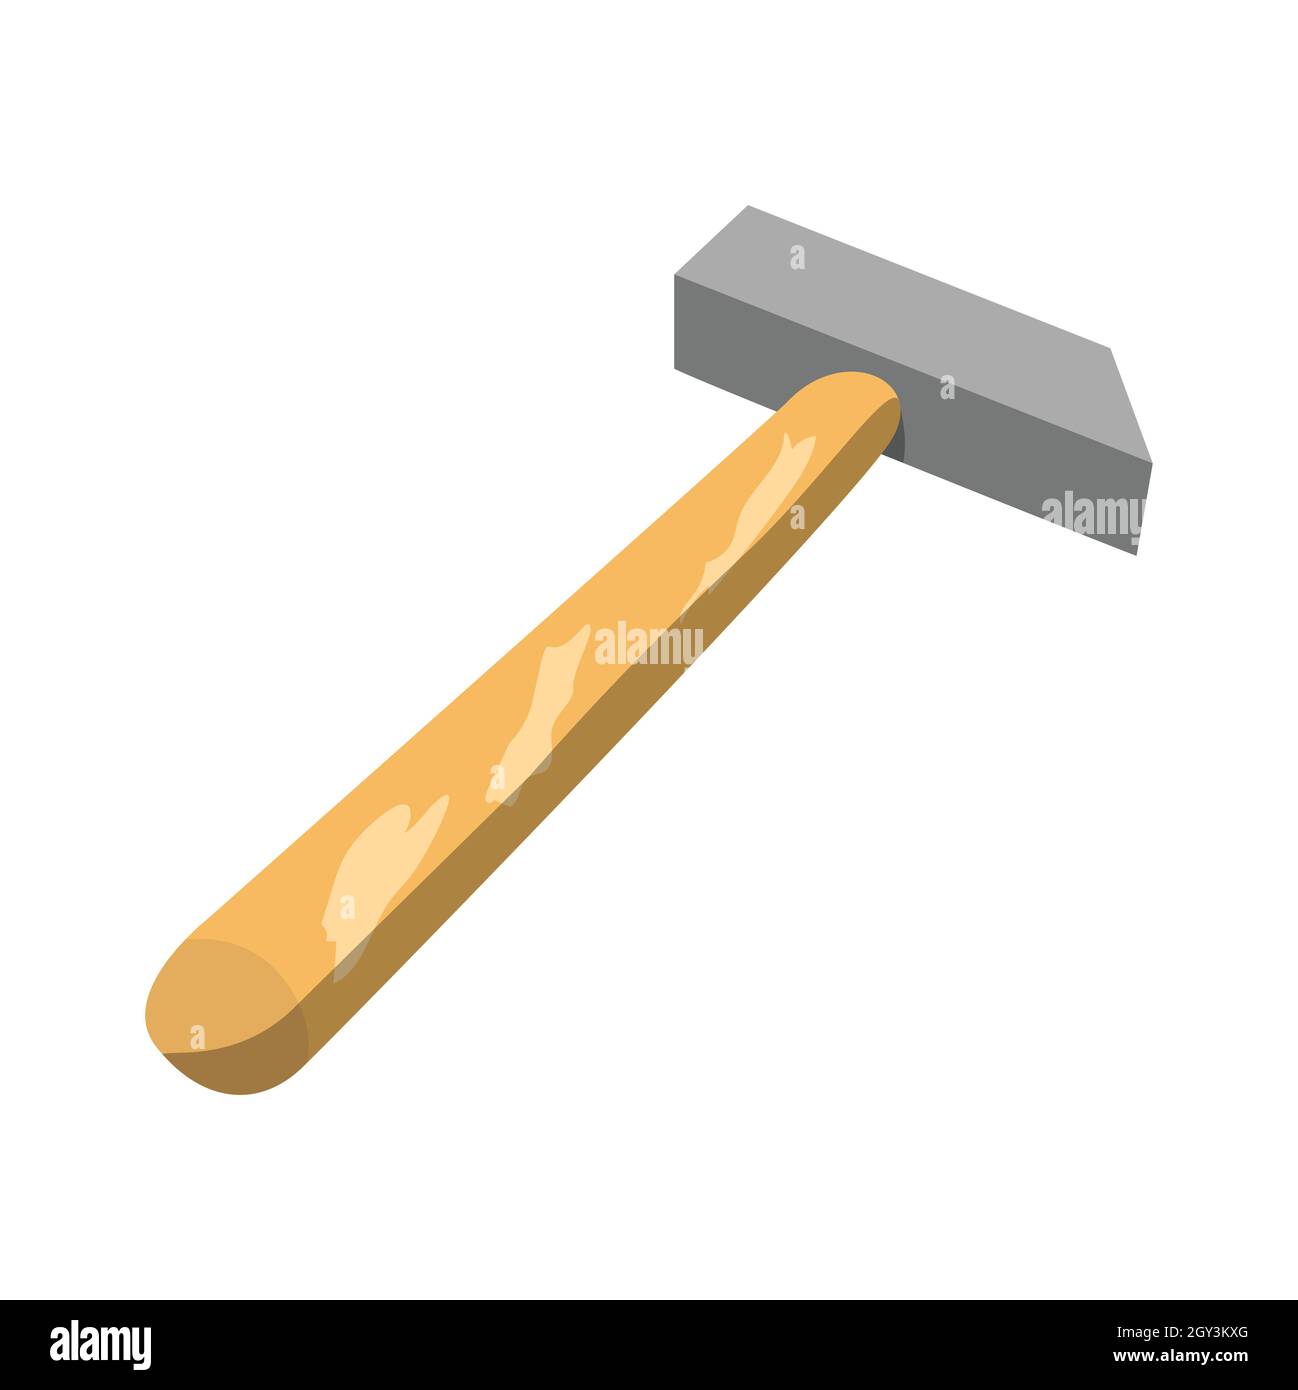 Hammers are usually used for nailing, fixing an object, forging metal, and destroying an object vector illustrations Stock Vector